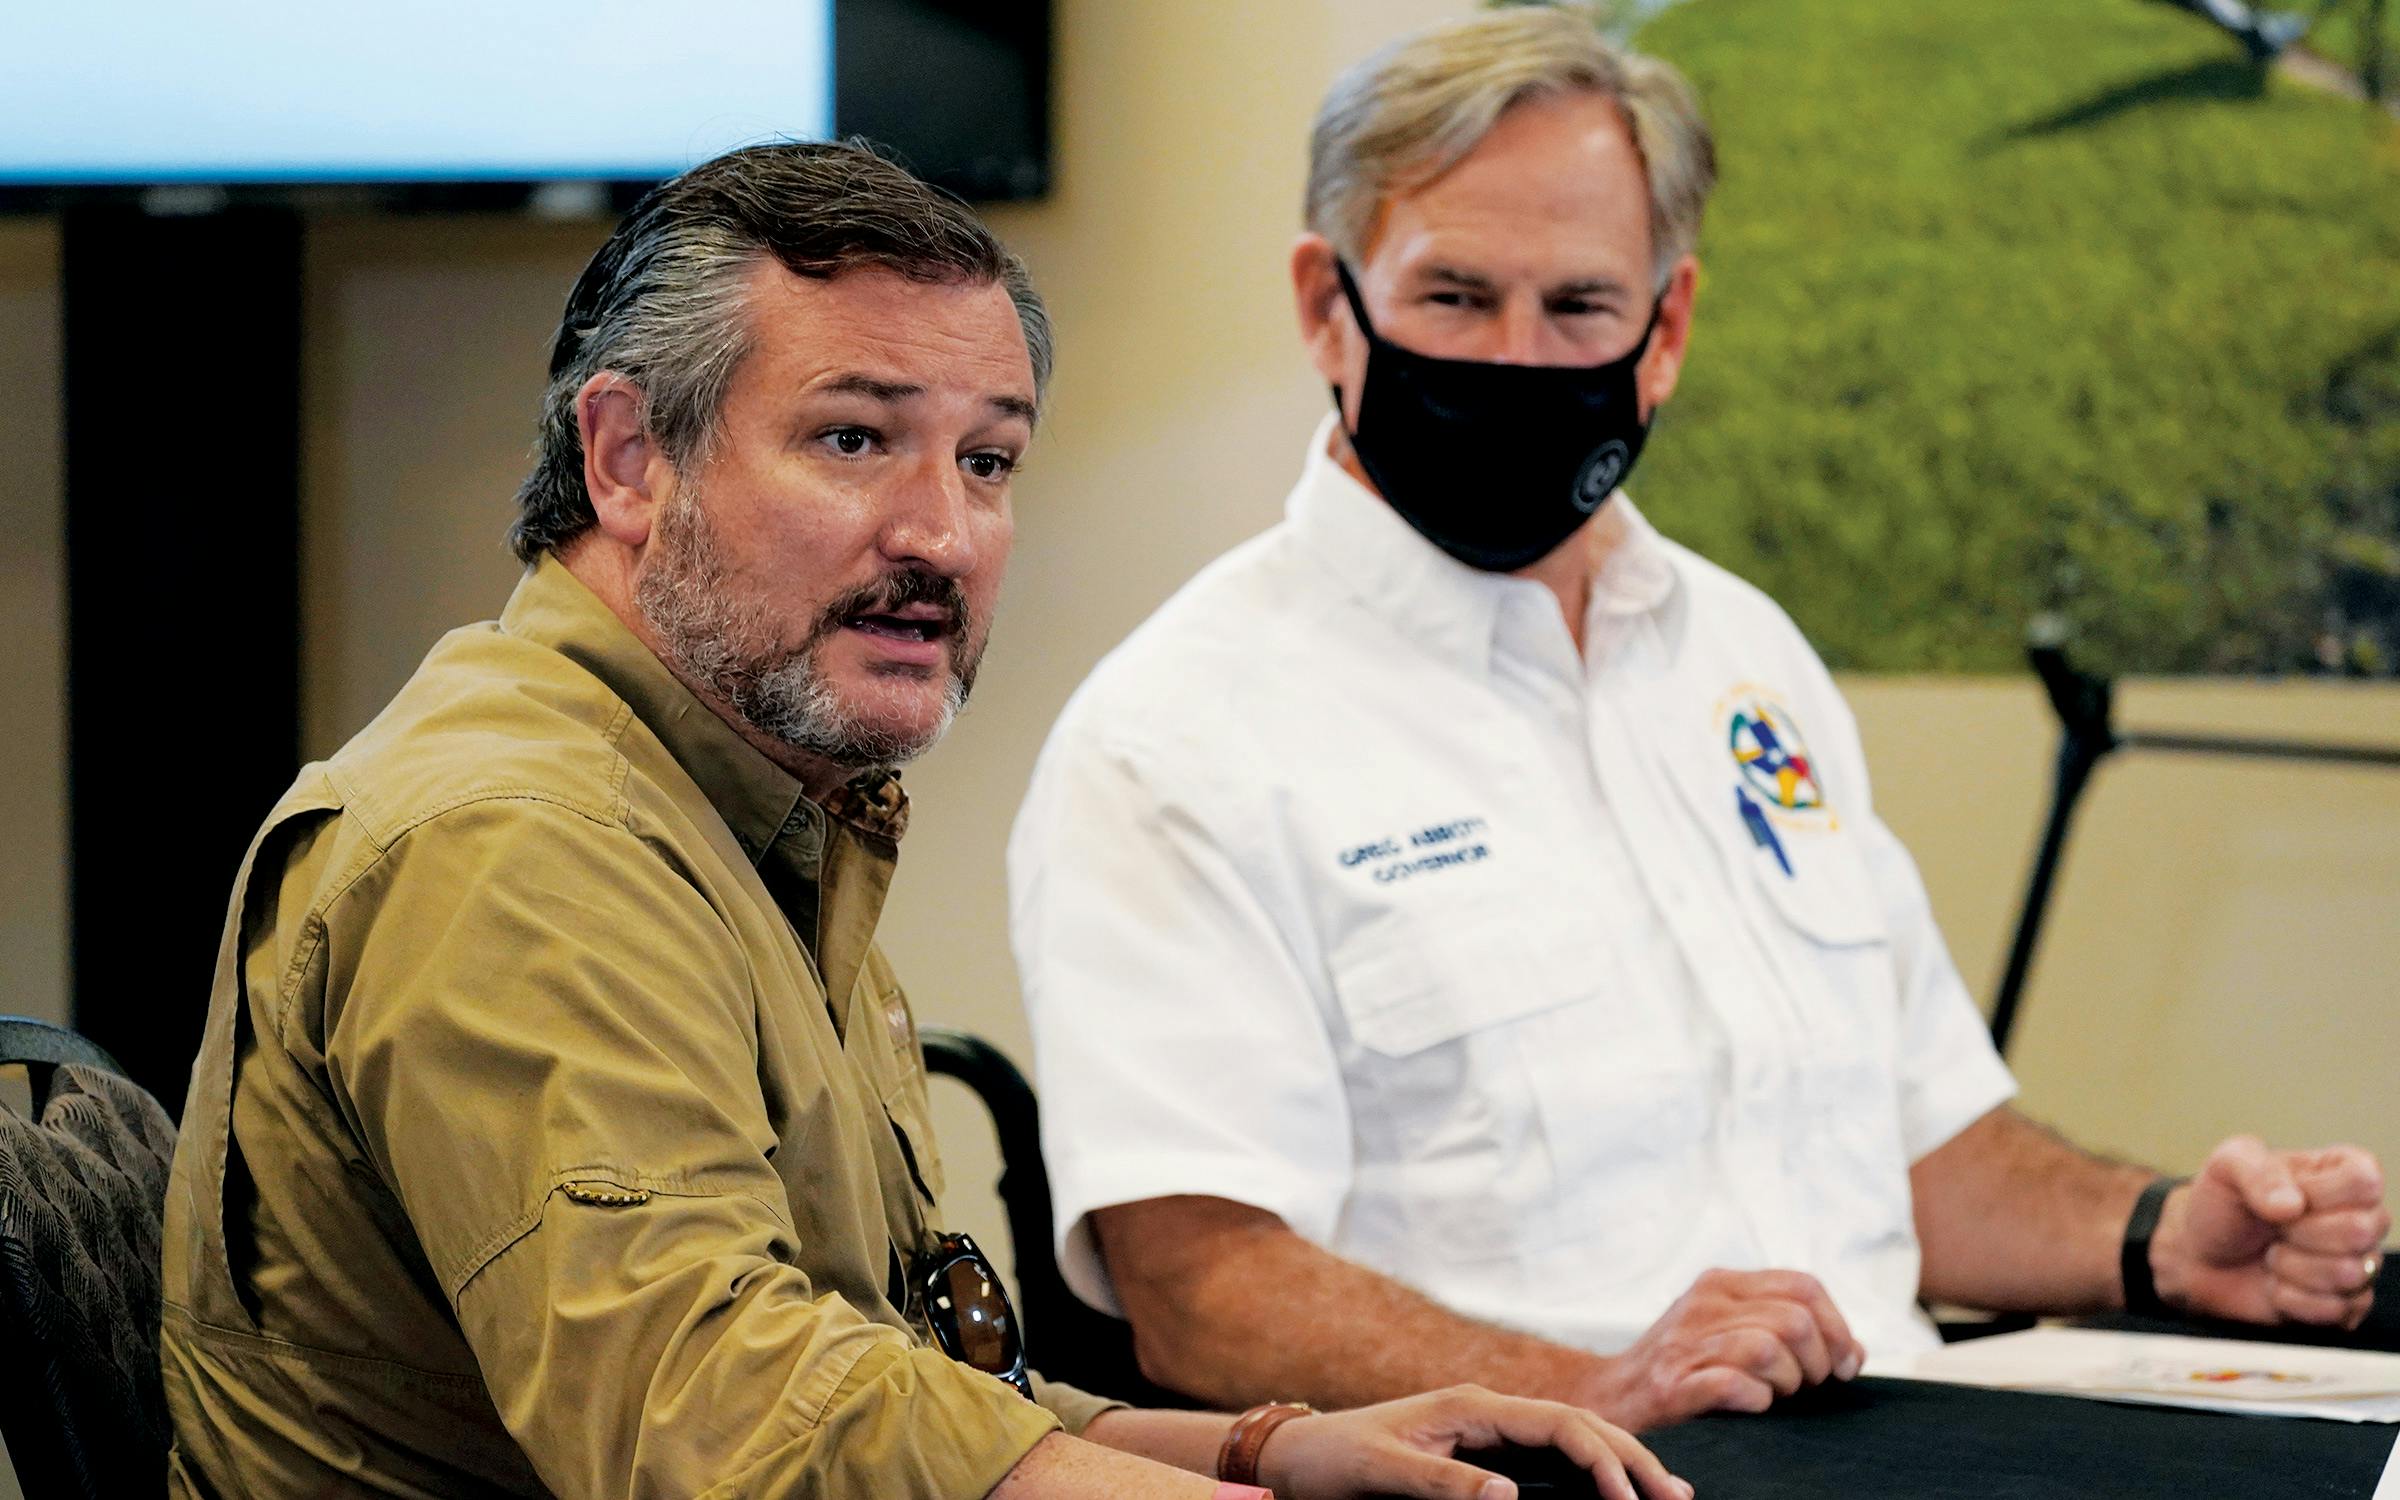 Senator Ted Cruz (left) and Governor Greg Abbott listen as President Donald Trump speaks during a briefing about Hurricane Laura, in Orange, on August 29, 2020.